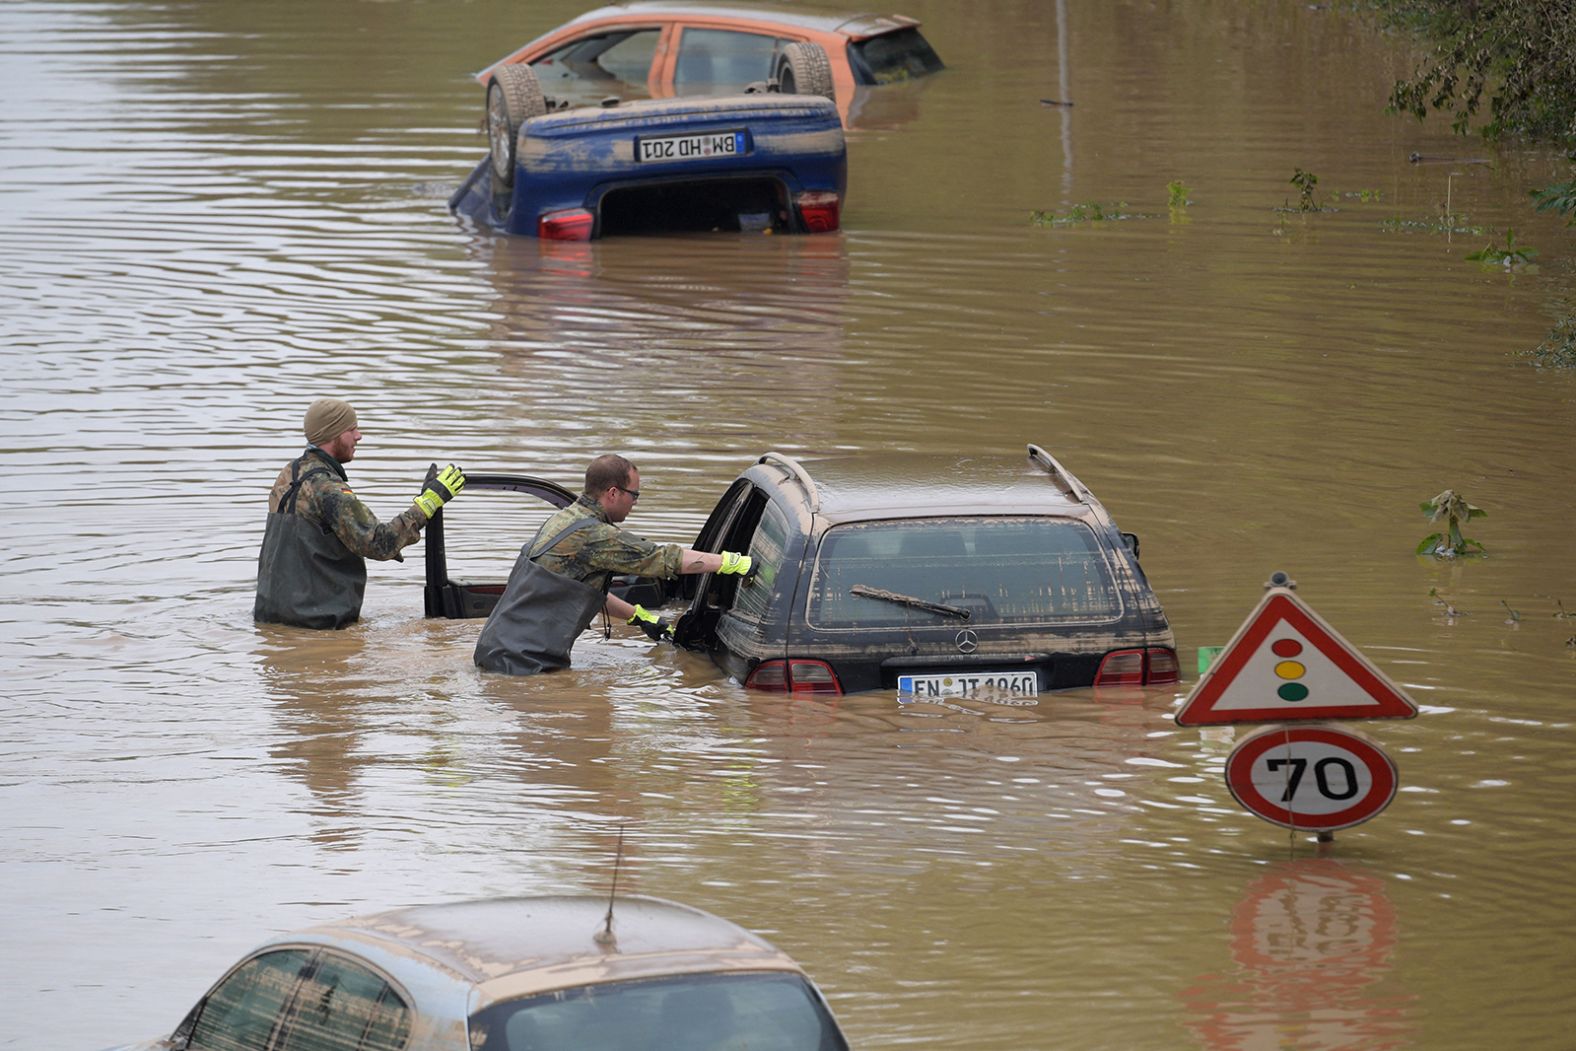 Members of the German armed forces search for flood victims in Erftstadt, Germany, on Saturday.